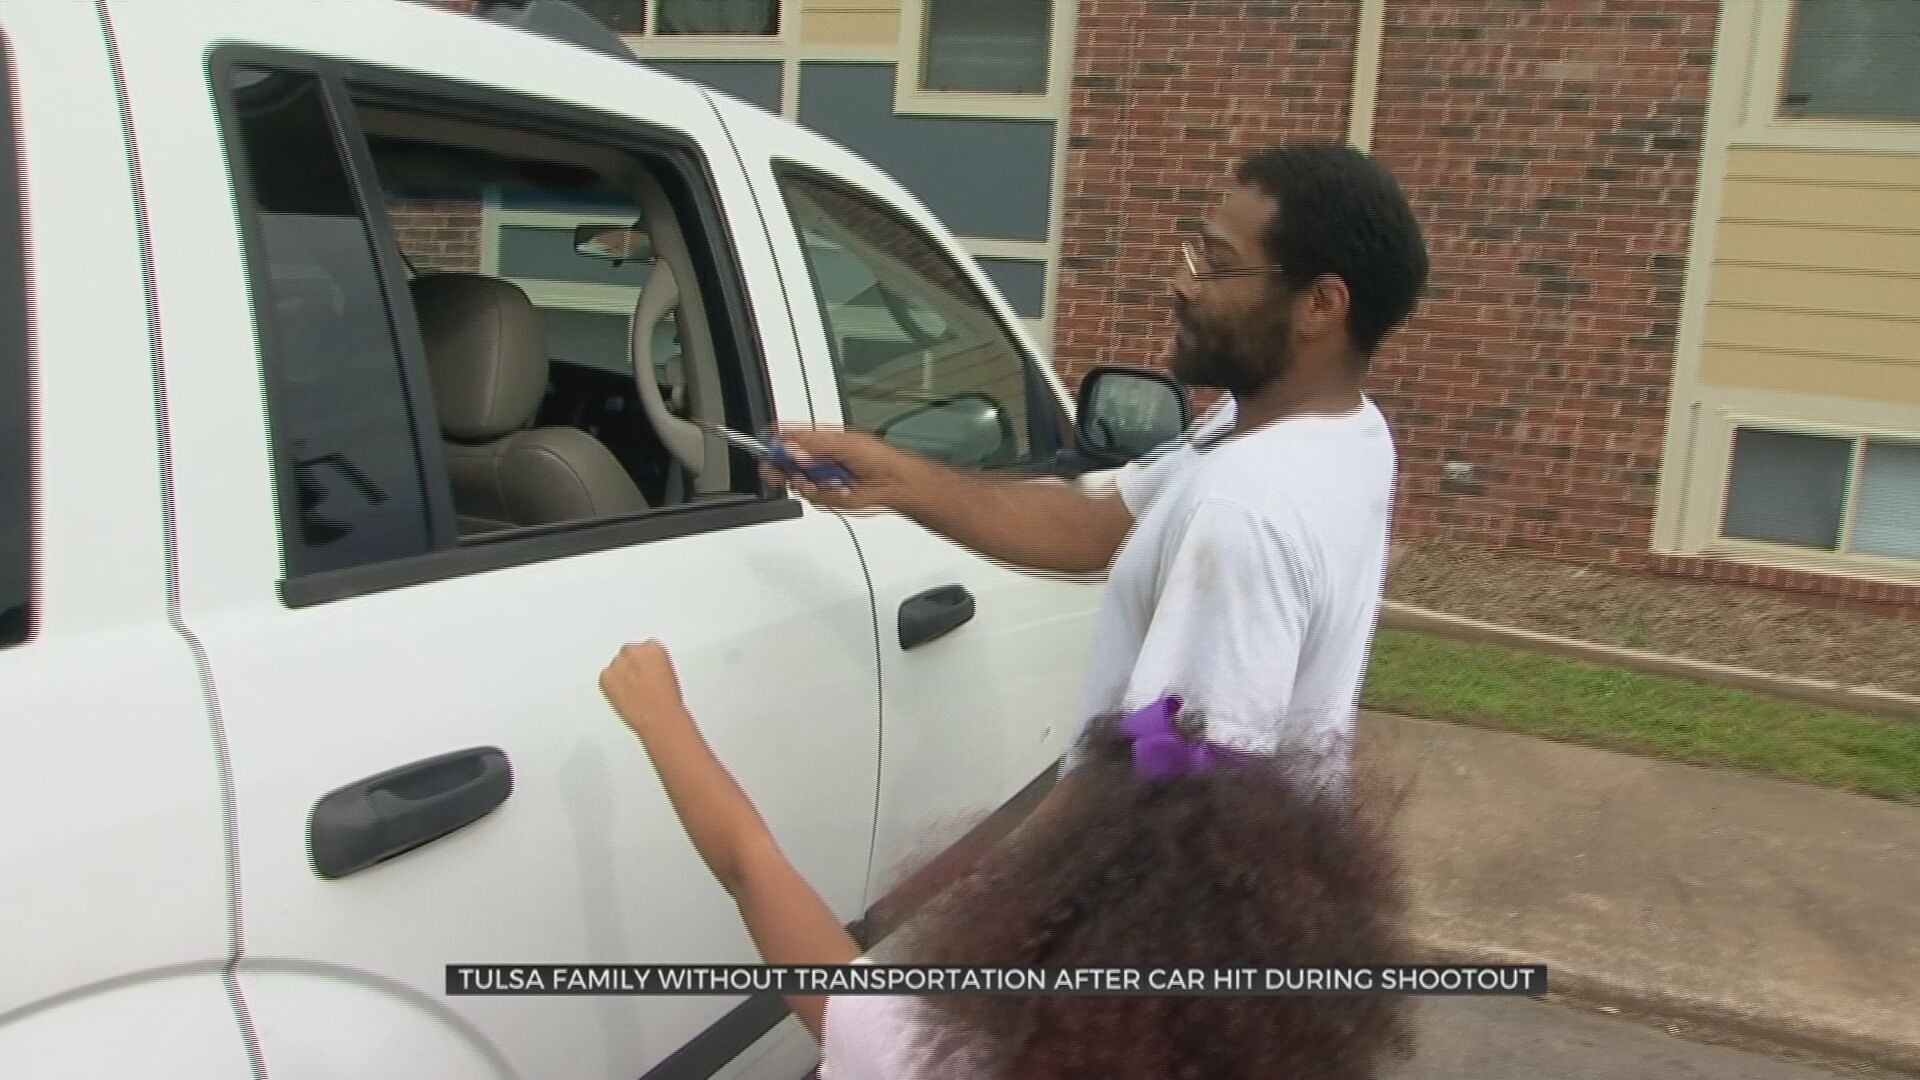 Tulsa Family Without Transportation After Car Damaged In Crossfire From Shootout